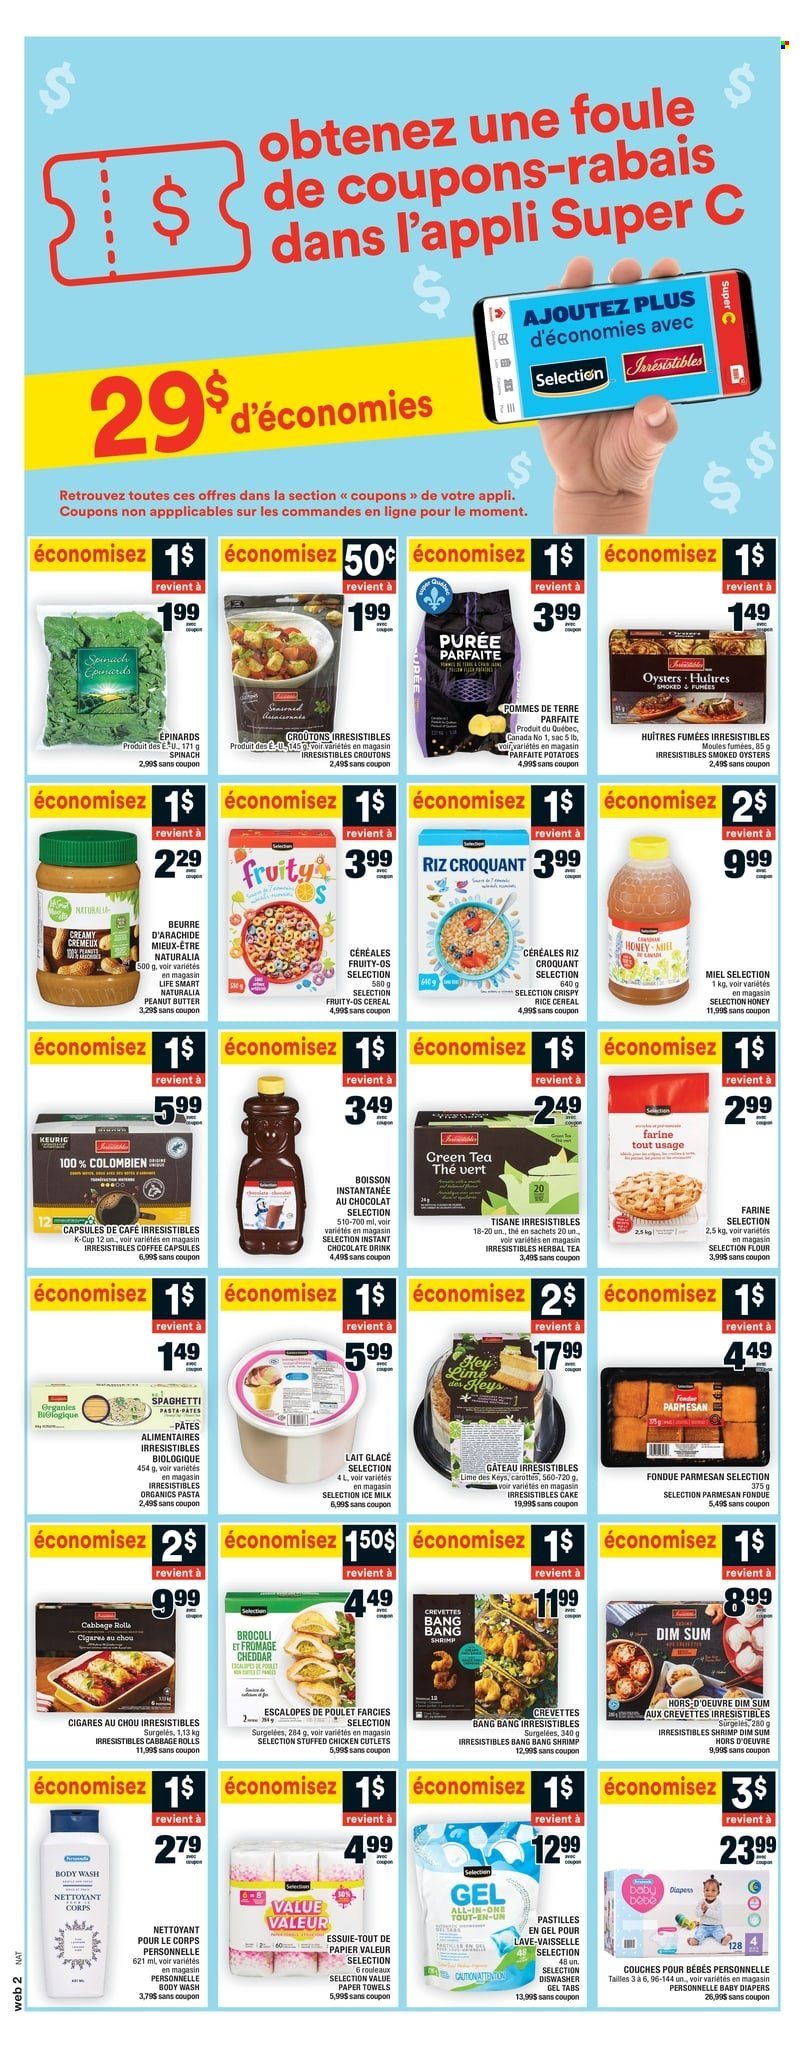 thumbnail - Super C Flyer - March 16, 2023 - March 22, 2023 - Sales products - cake, cabbage, potatoes, smoked oysters, oysters, shrimps, spaghetti, pasta, stuffed chicken, cheddar, parmesan, cheese, milk, pastilles, croutons, flour, cereals, honey, peanut butter, chocolate drink, green tea, tea, herbal tea, coffee, coffee capsules, K-Cups, Keurig, chicken breasts, chicken cutlets, chicken, nappies, kitchen towels, paper towels, body wash. Page 12.